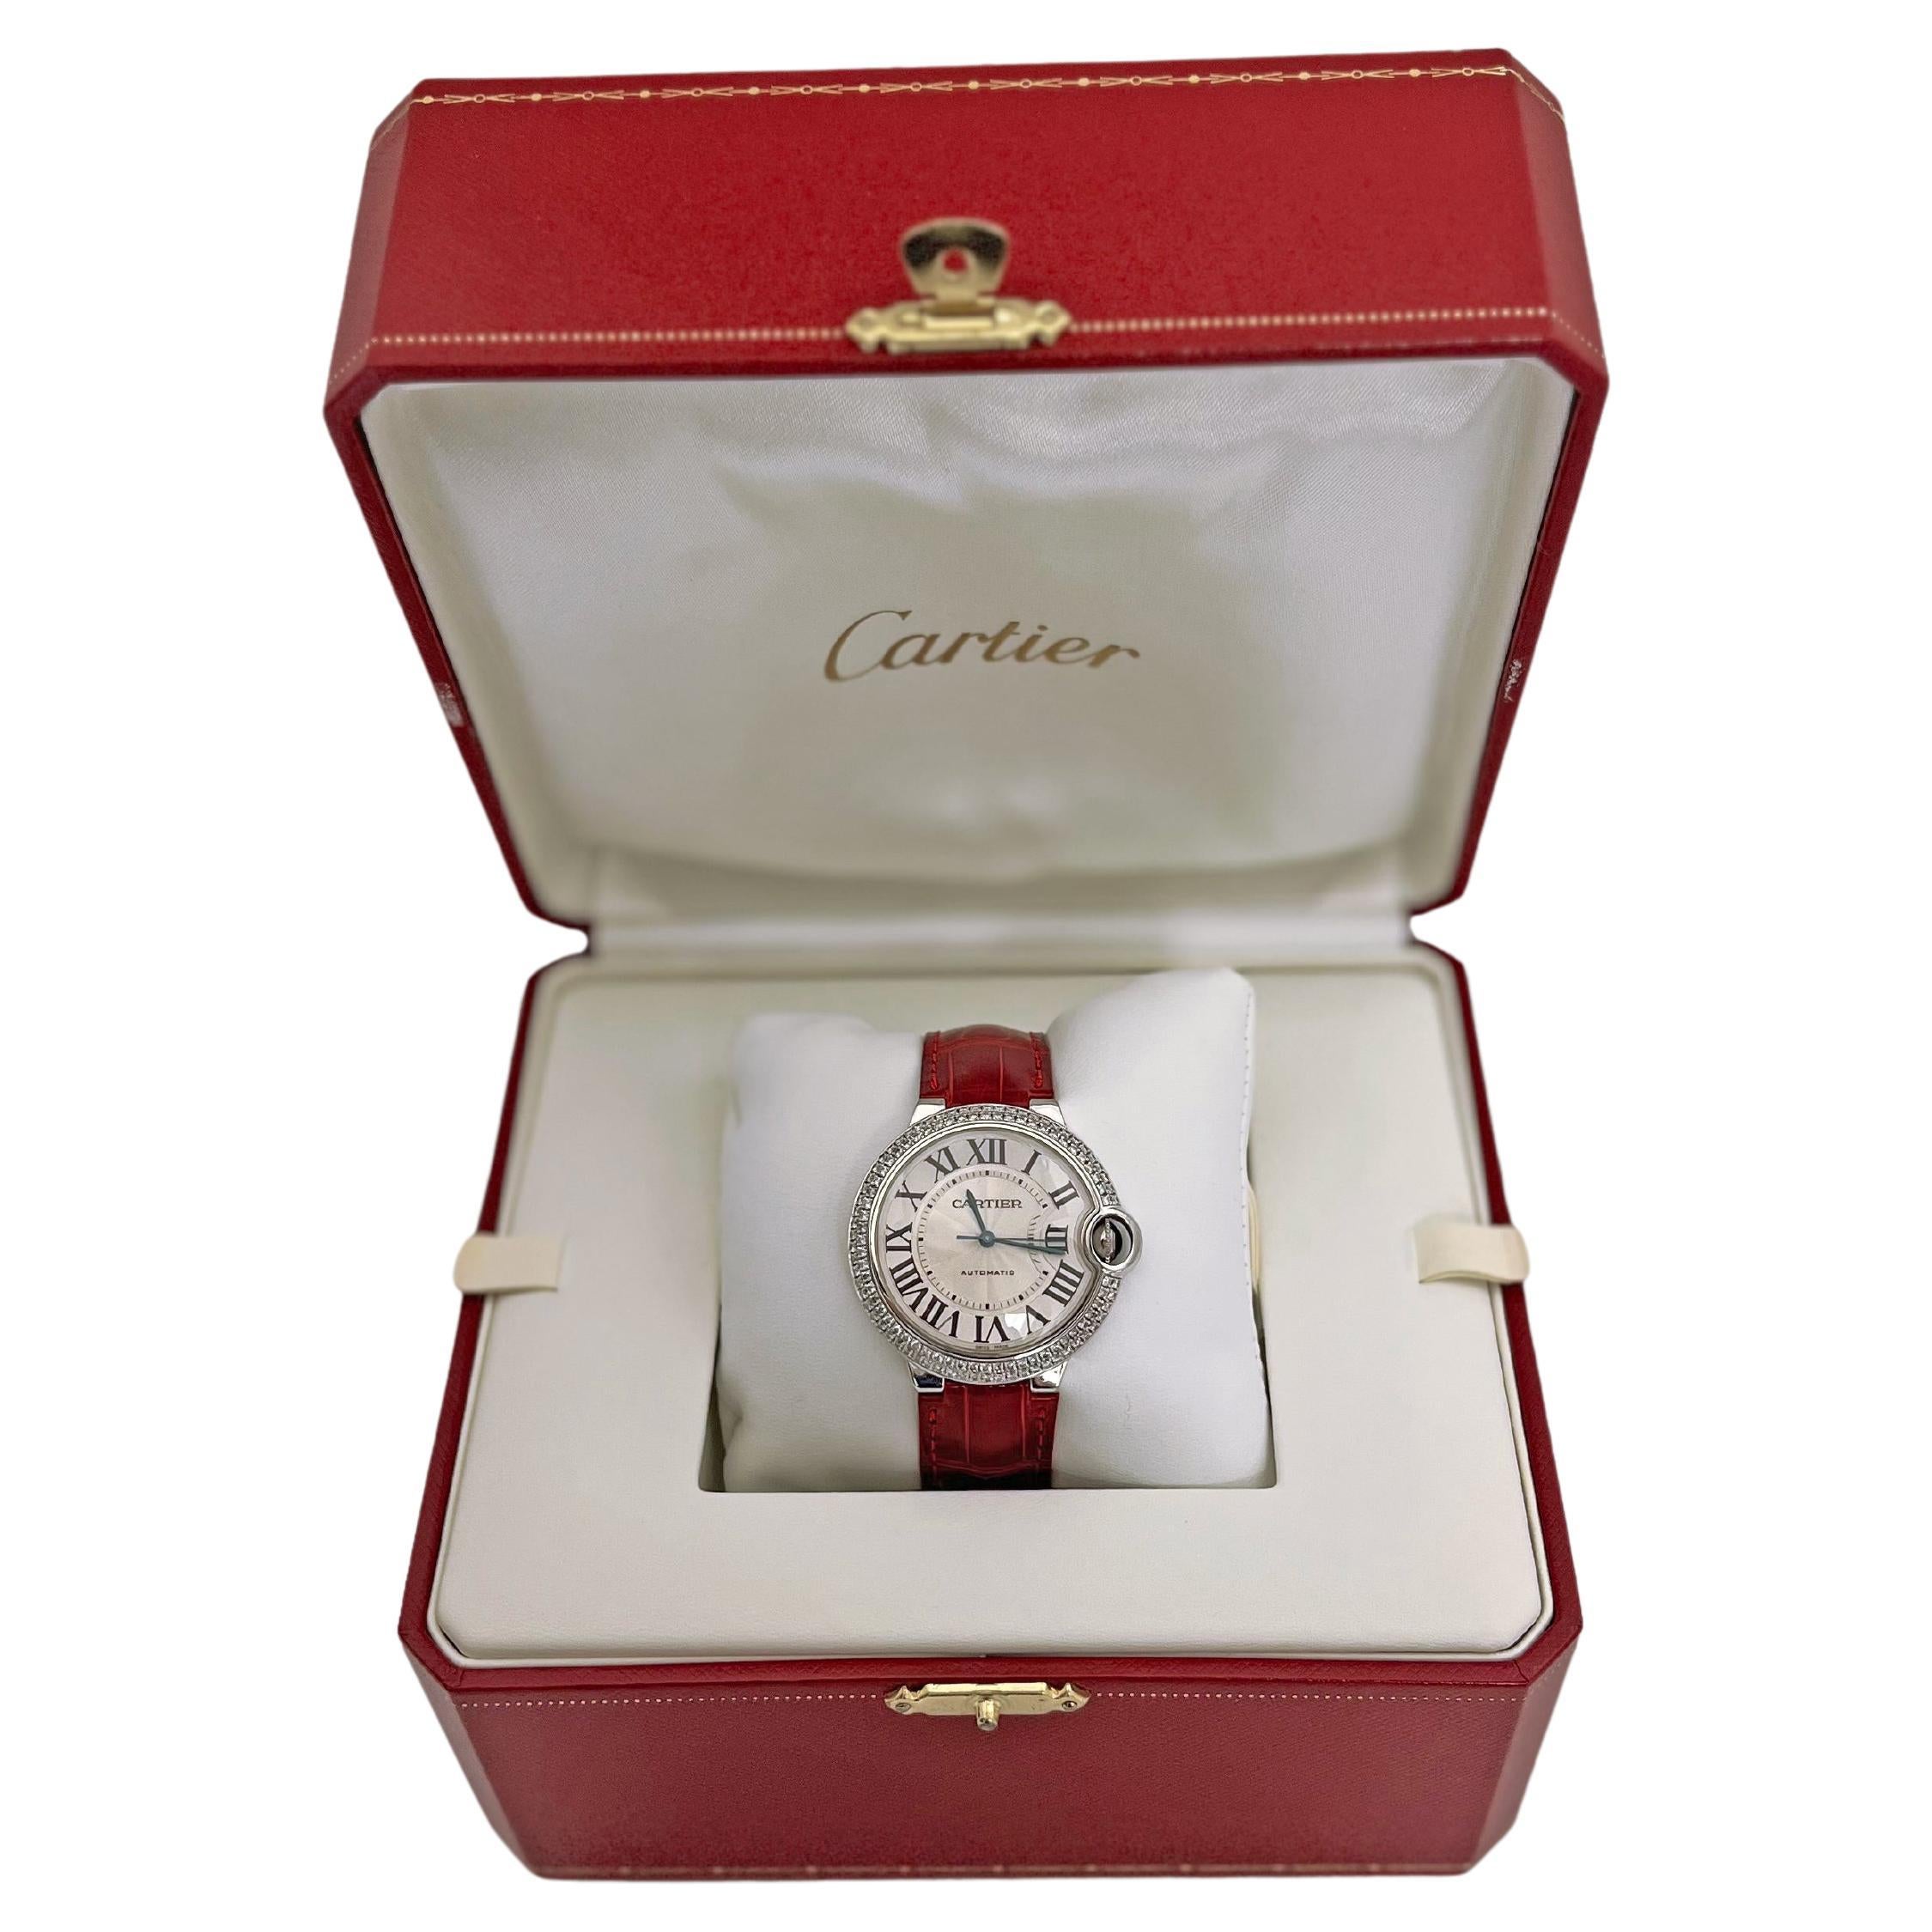 Pre-owned Cartier Ballon Bleu wristwatch (ref. WE900651), featuring a self-winding automatic movement; silvered opaline flinqué dial with black Roman numerals & blued-steel, sword-shaped hands; center seconds hand; and 36mm, 18k white gold case with